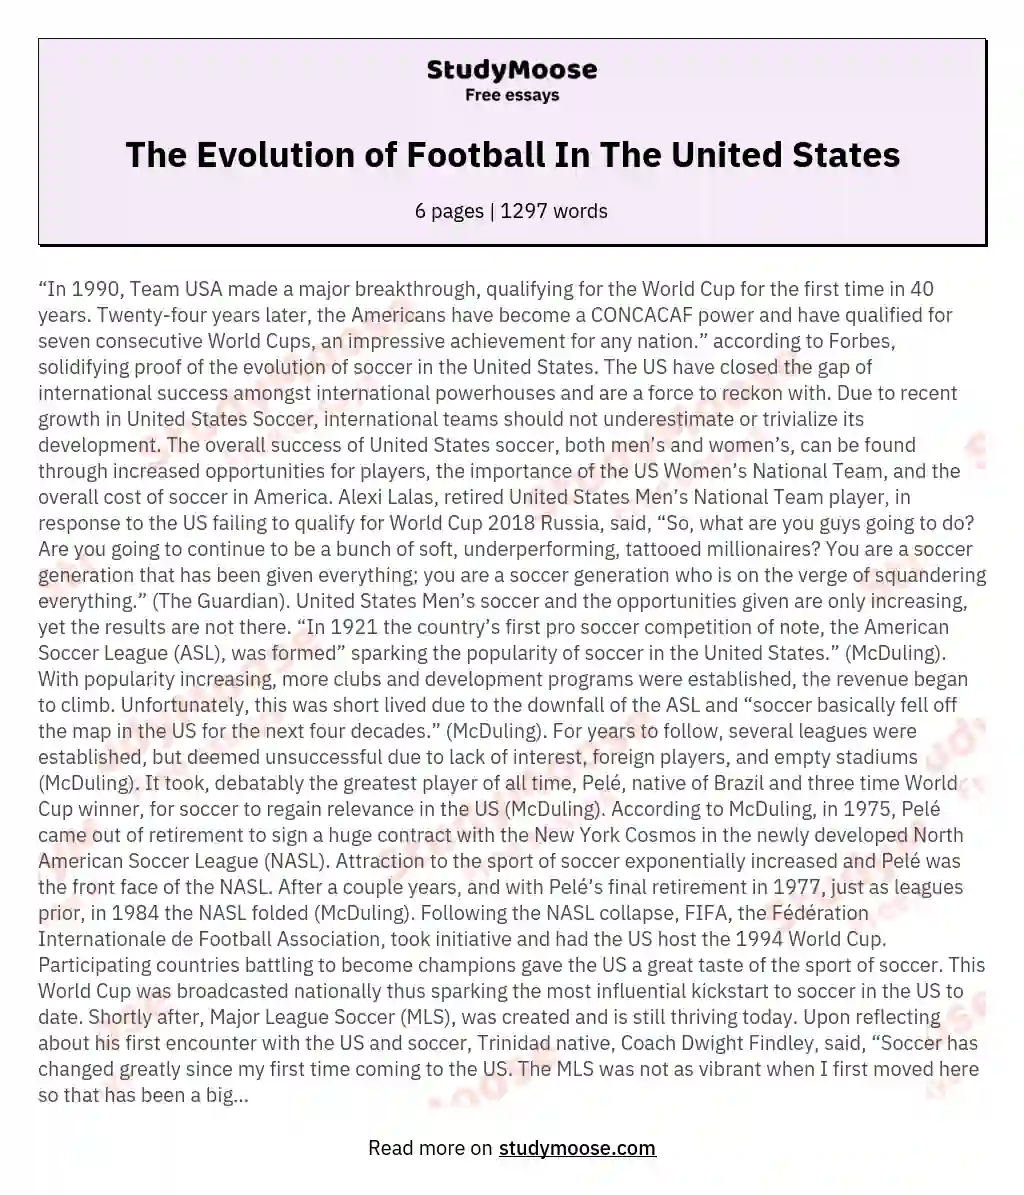 The Evolution of Football In The United States essay